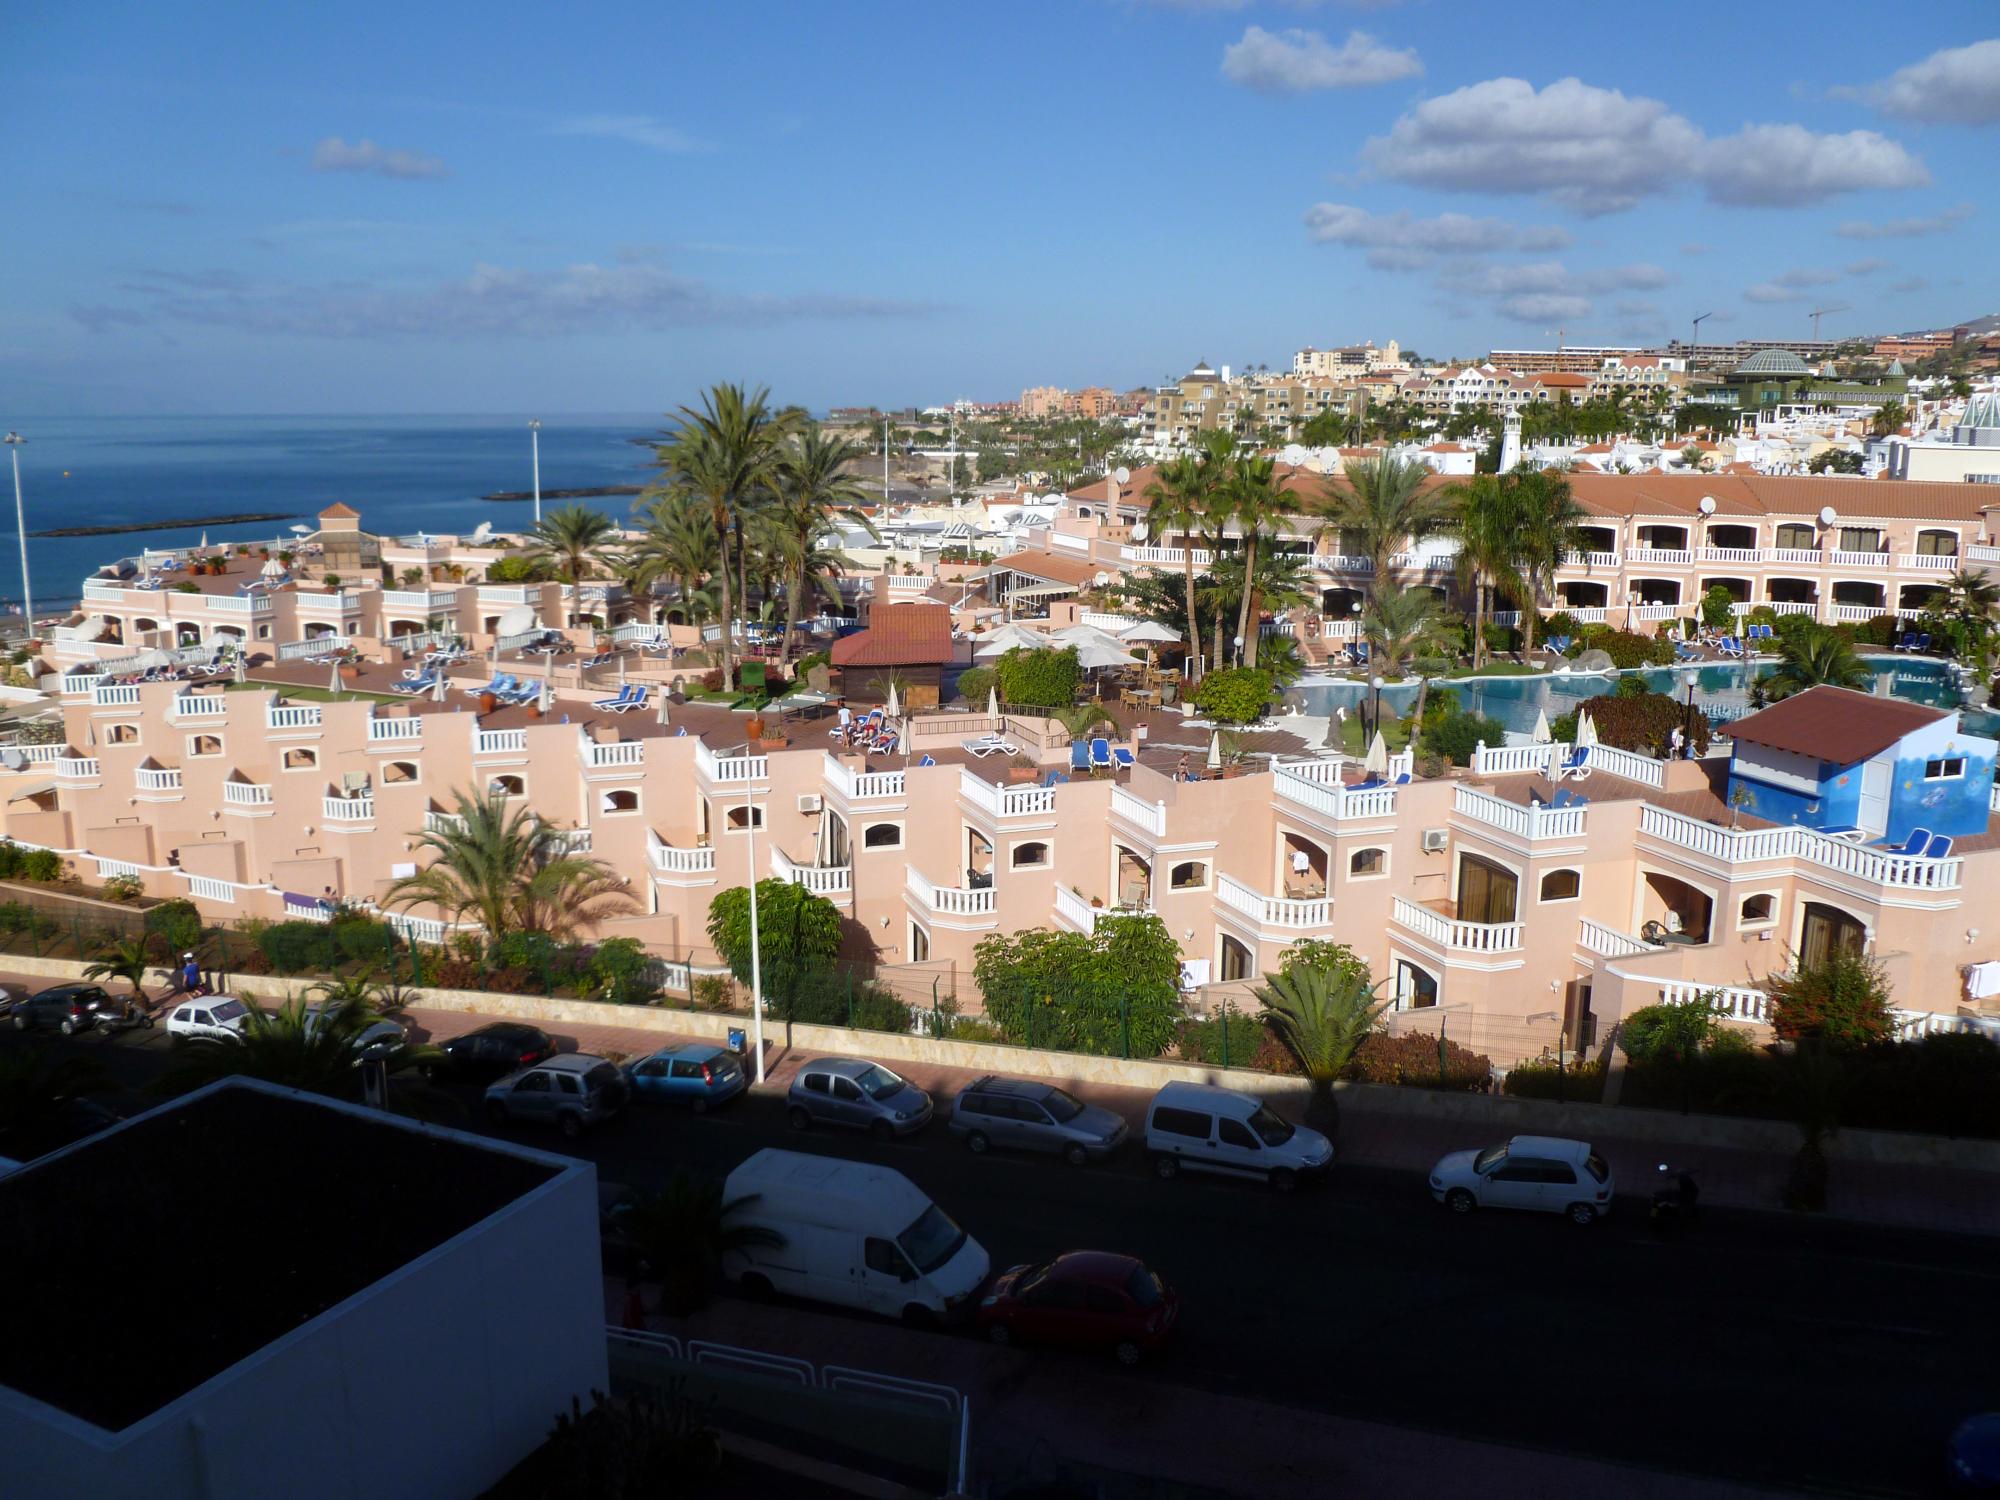  Canary Islands - Room View #2